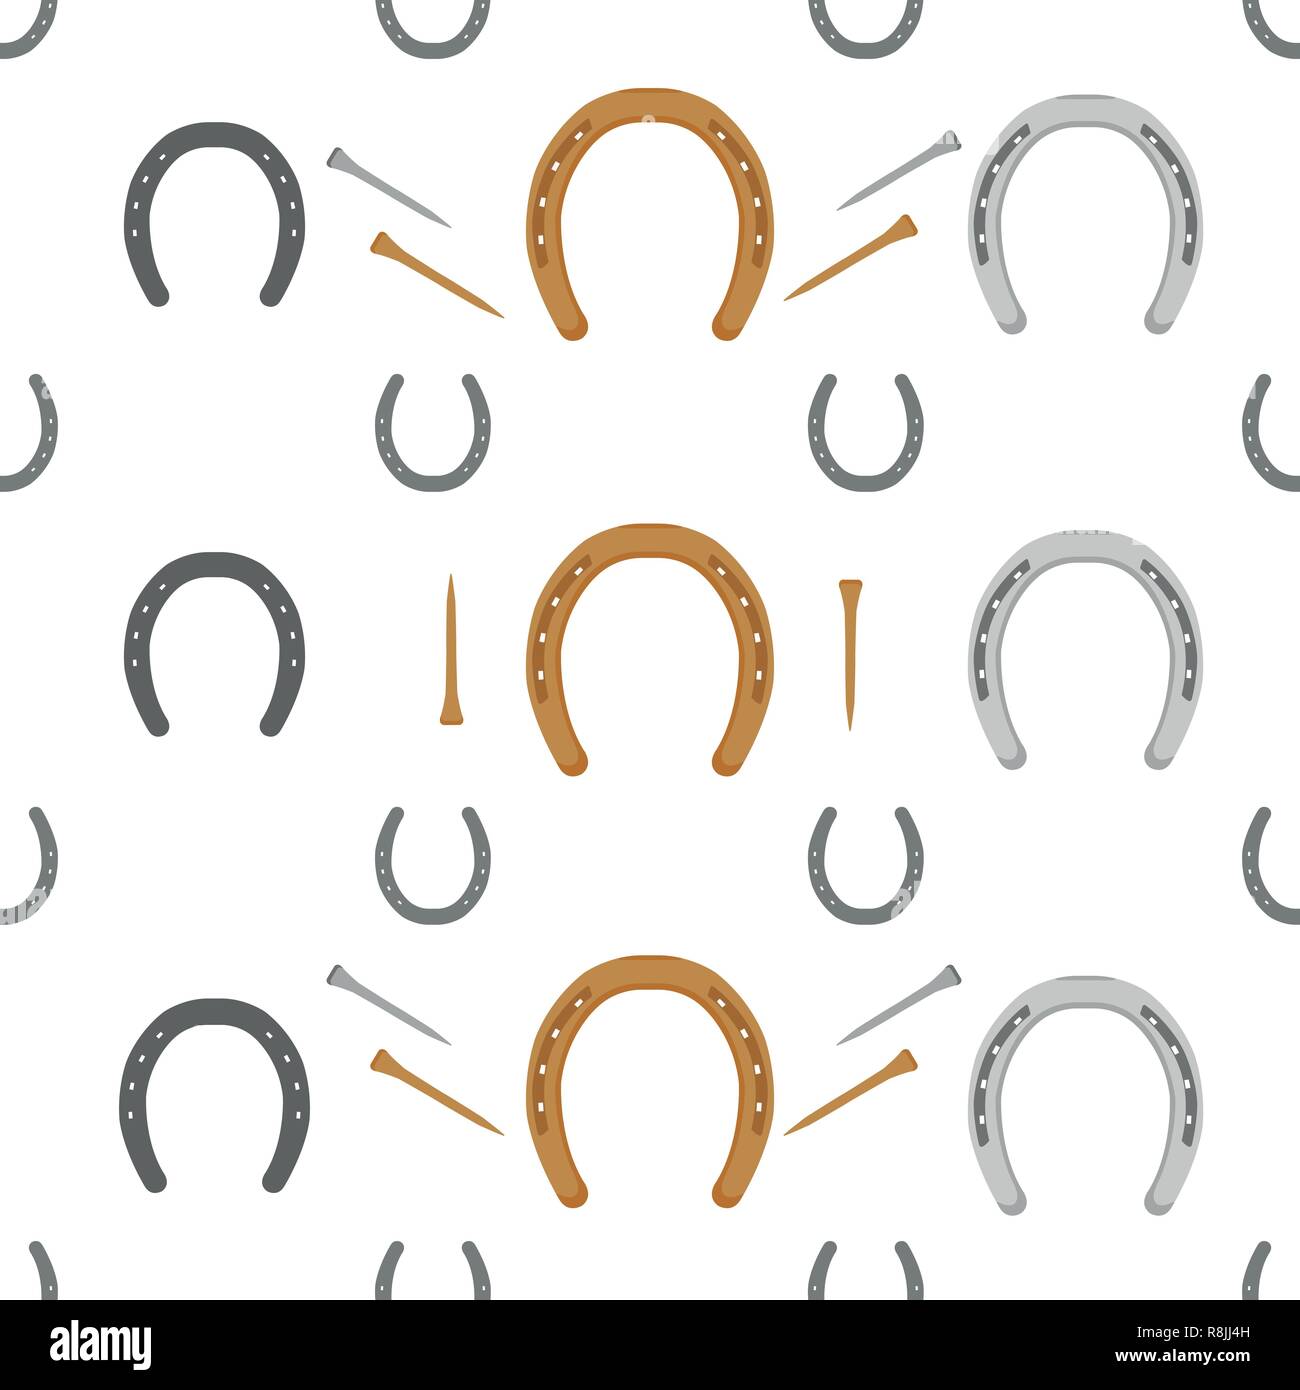 Horseshoes and nails - a seamless vector background equestrian theme. Horse equipment. For wrapping paper, backdrops, prints on clothing. Stock Vector